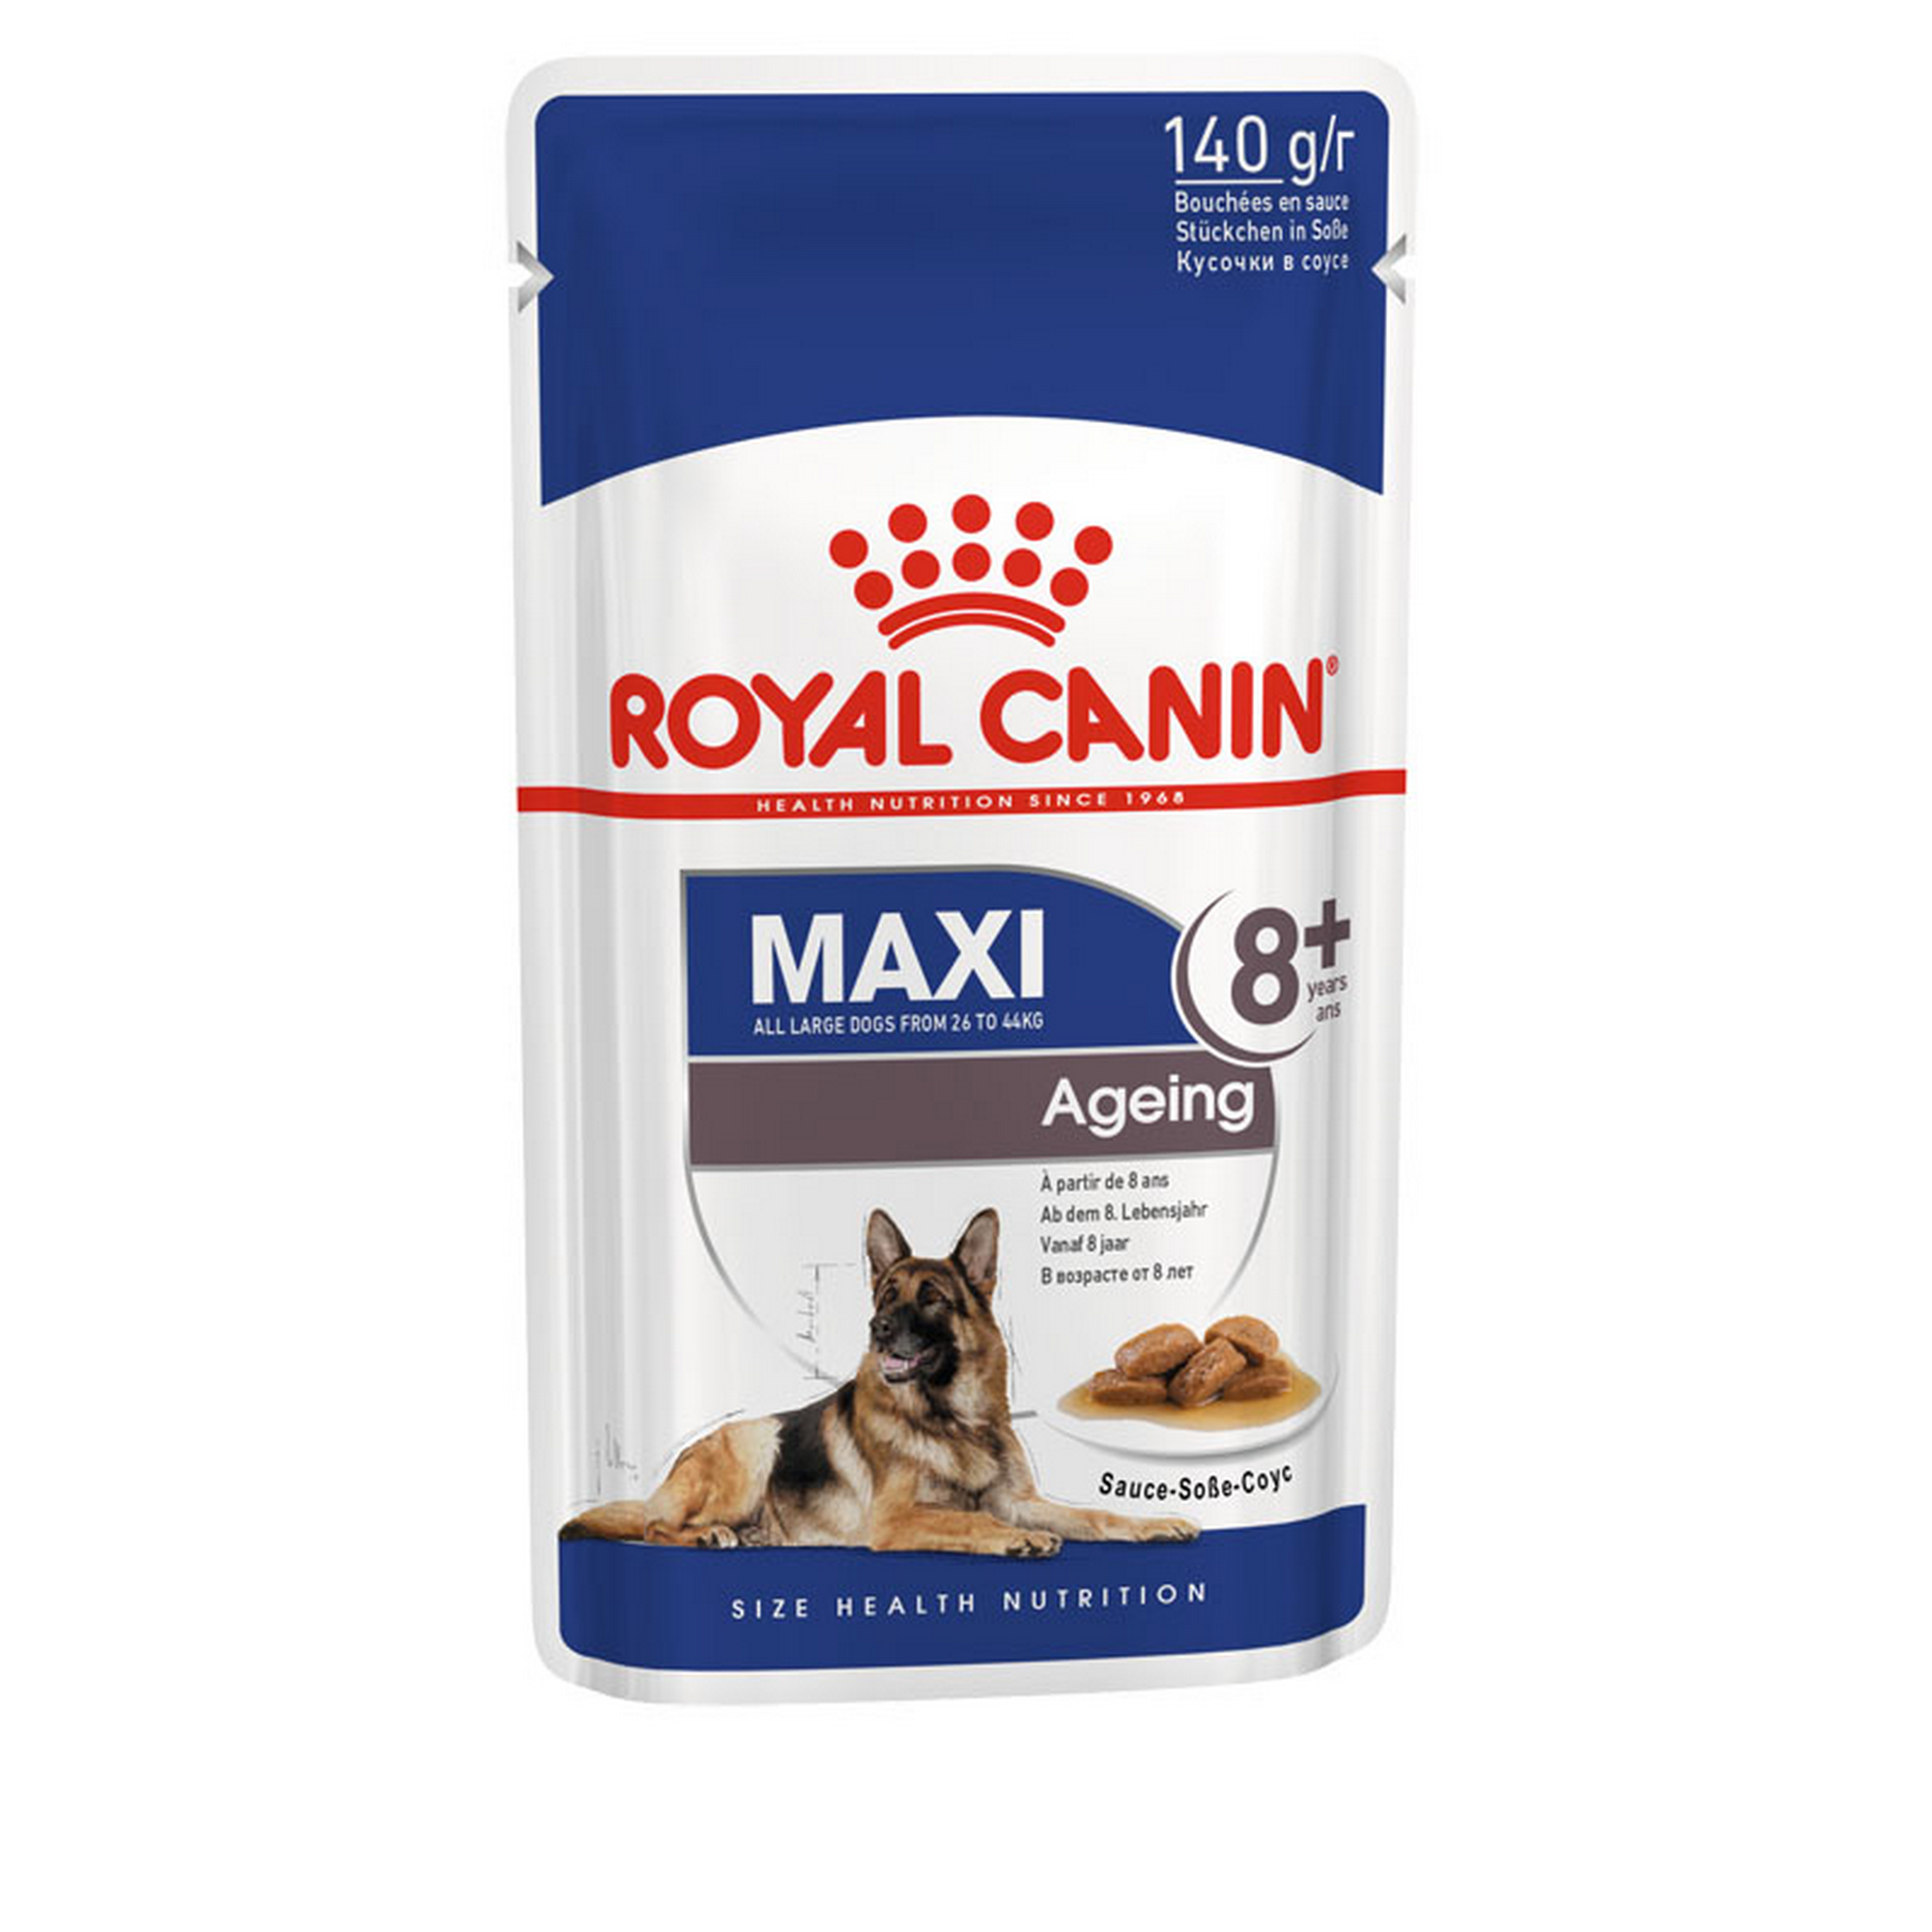 ROYAL CANIN MAXI Ageing 8+ Nassfutter für ältere große Hunde + product picture